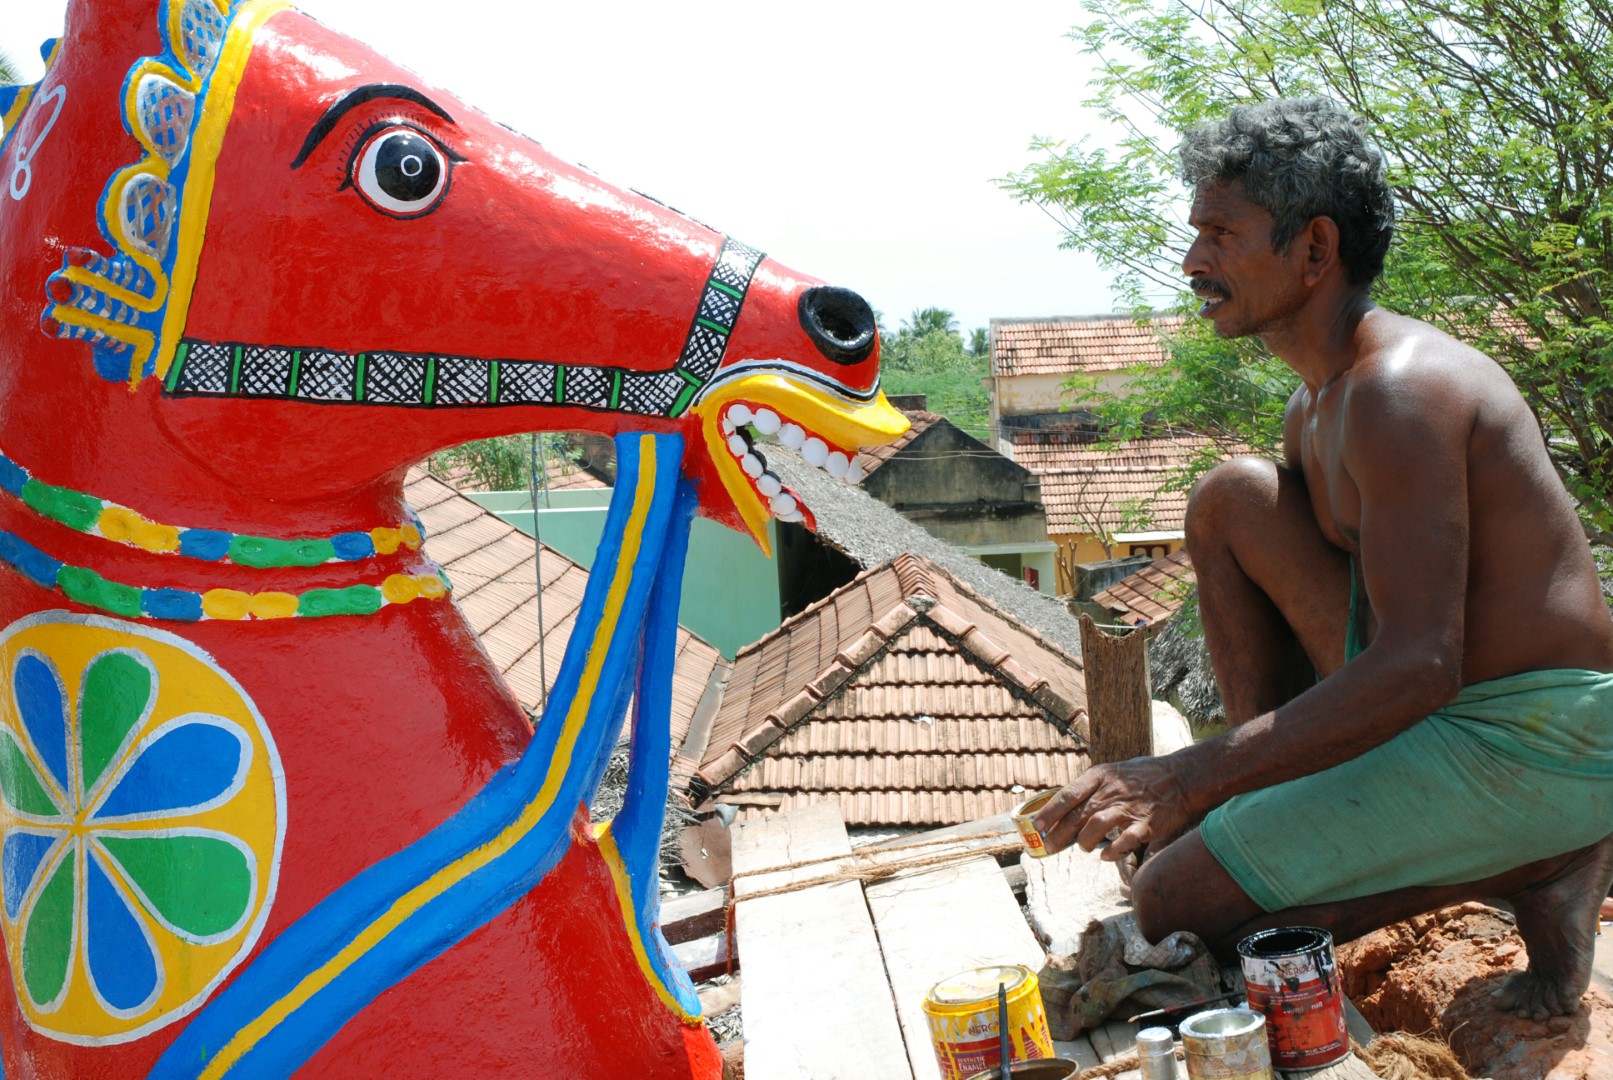 <span style="font-weight:normal;">A gigantic horse, the principle offering at Kuthadivayal, is the largest currently made in Tamil Nadu, measuring around 6 metres in height. Kashirajan, the chief potter, puts the finishing touches on the extraordinary beast just hours before the festival commences.</span>